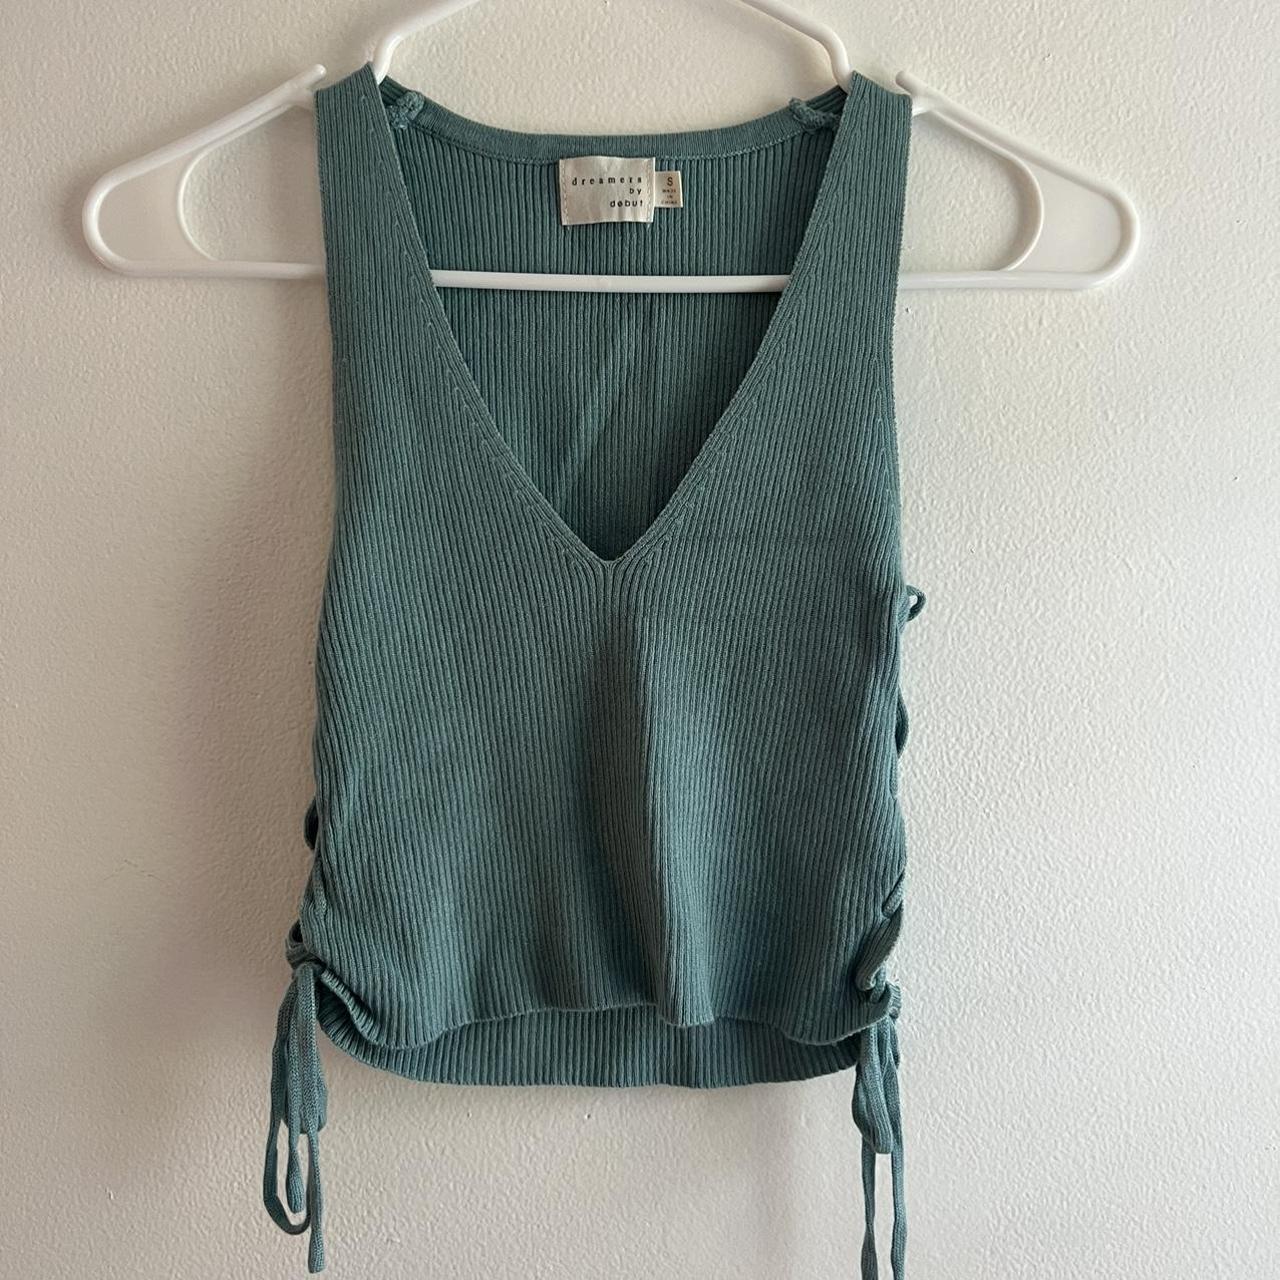 DREAMERS BY DEBUT Women's Blue and Green Vest